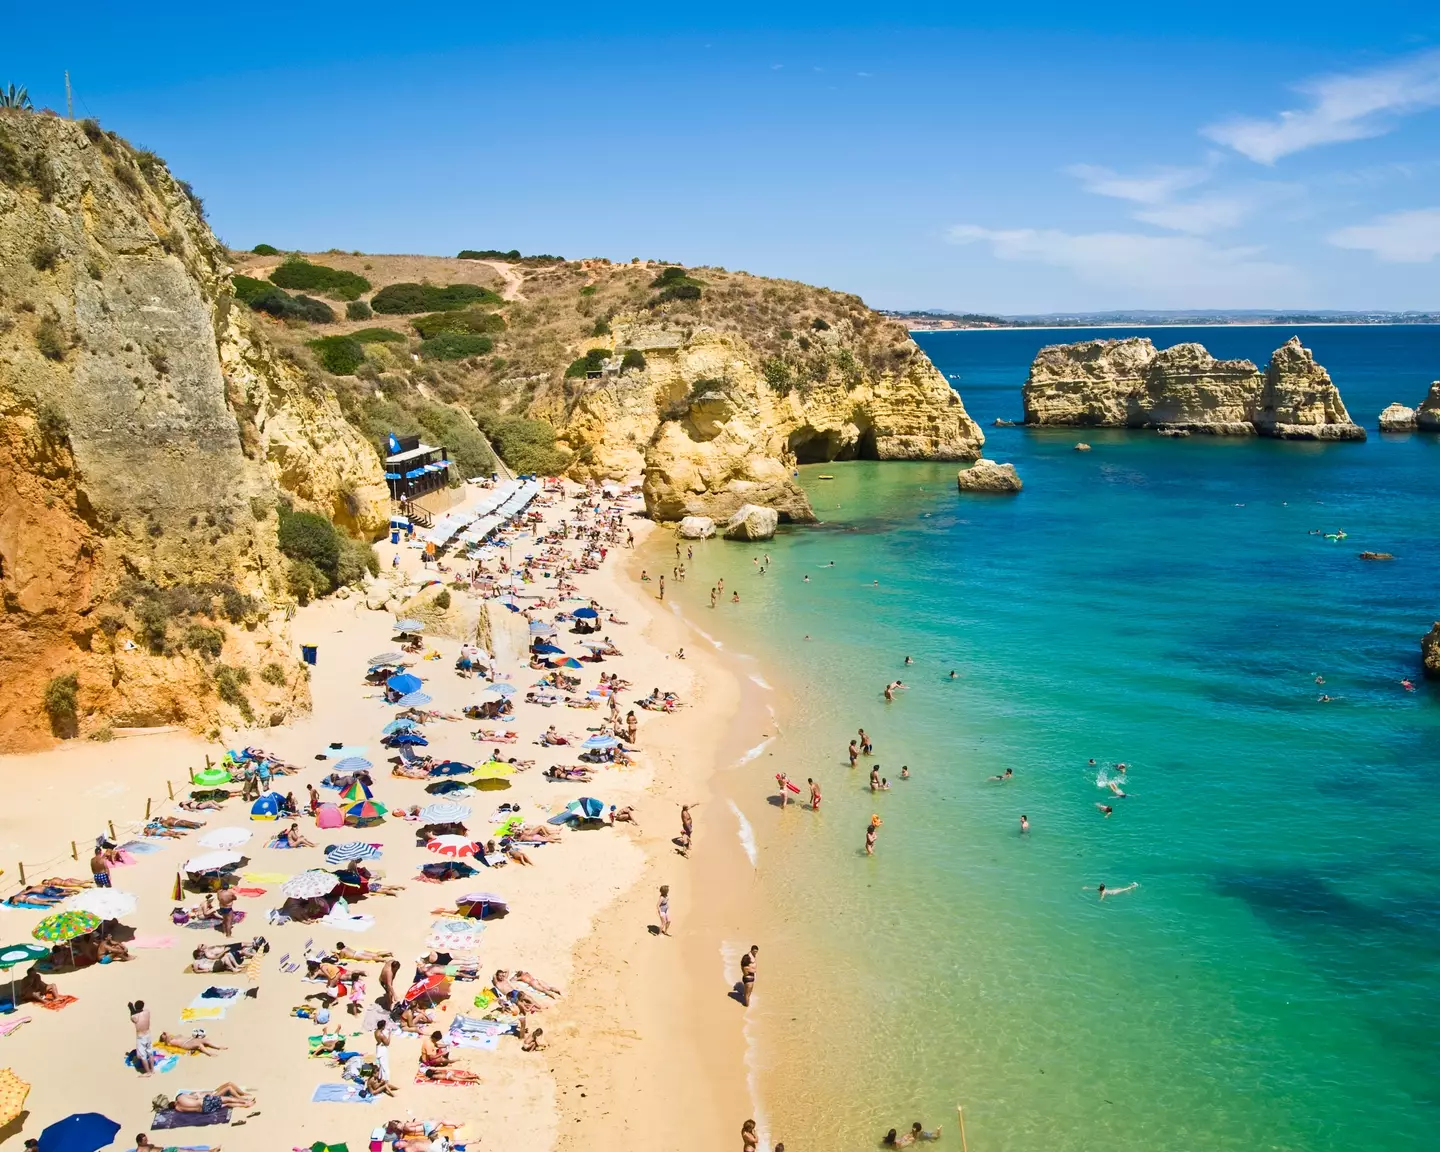 Lagos in Portugal is home to stunning beaches.